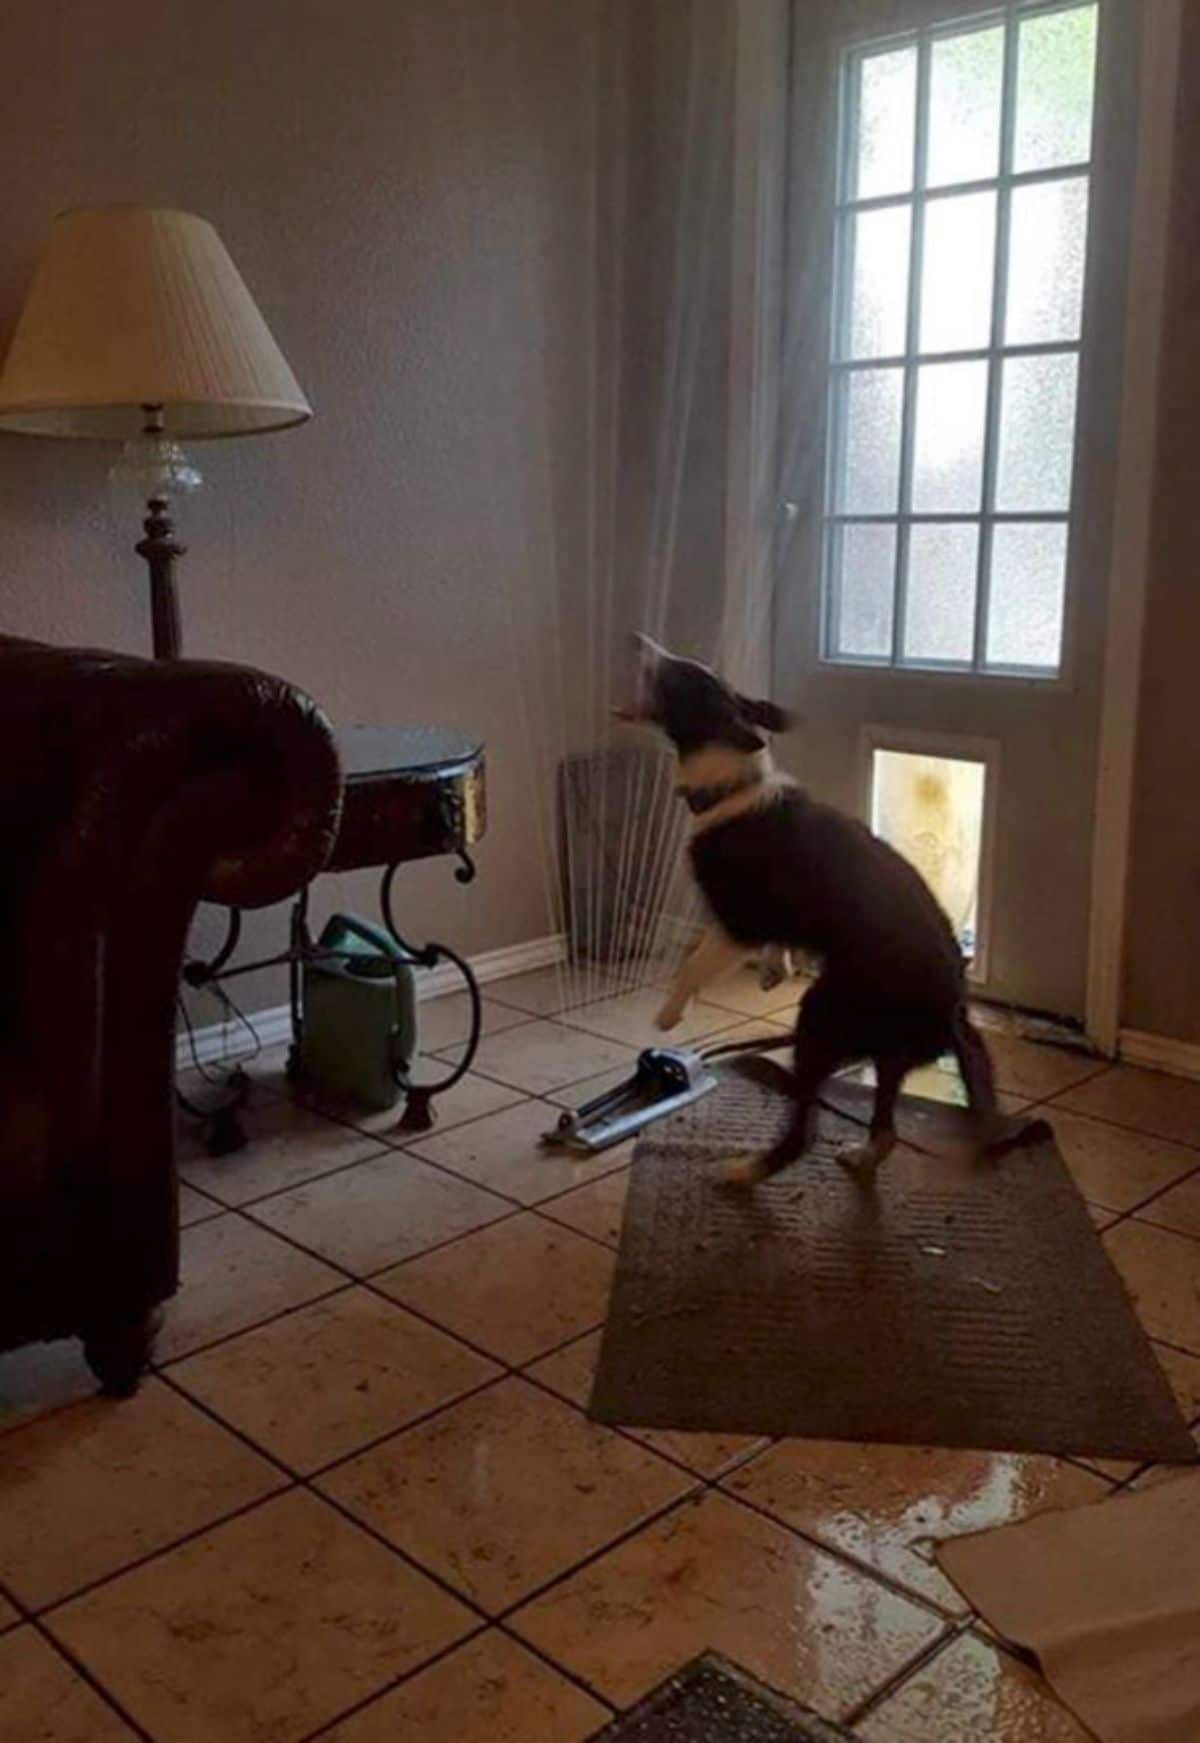 black and white dog jumping up trying to catch the water from a sprinkler inside a house